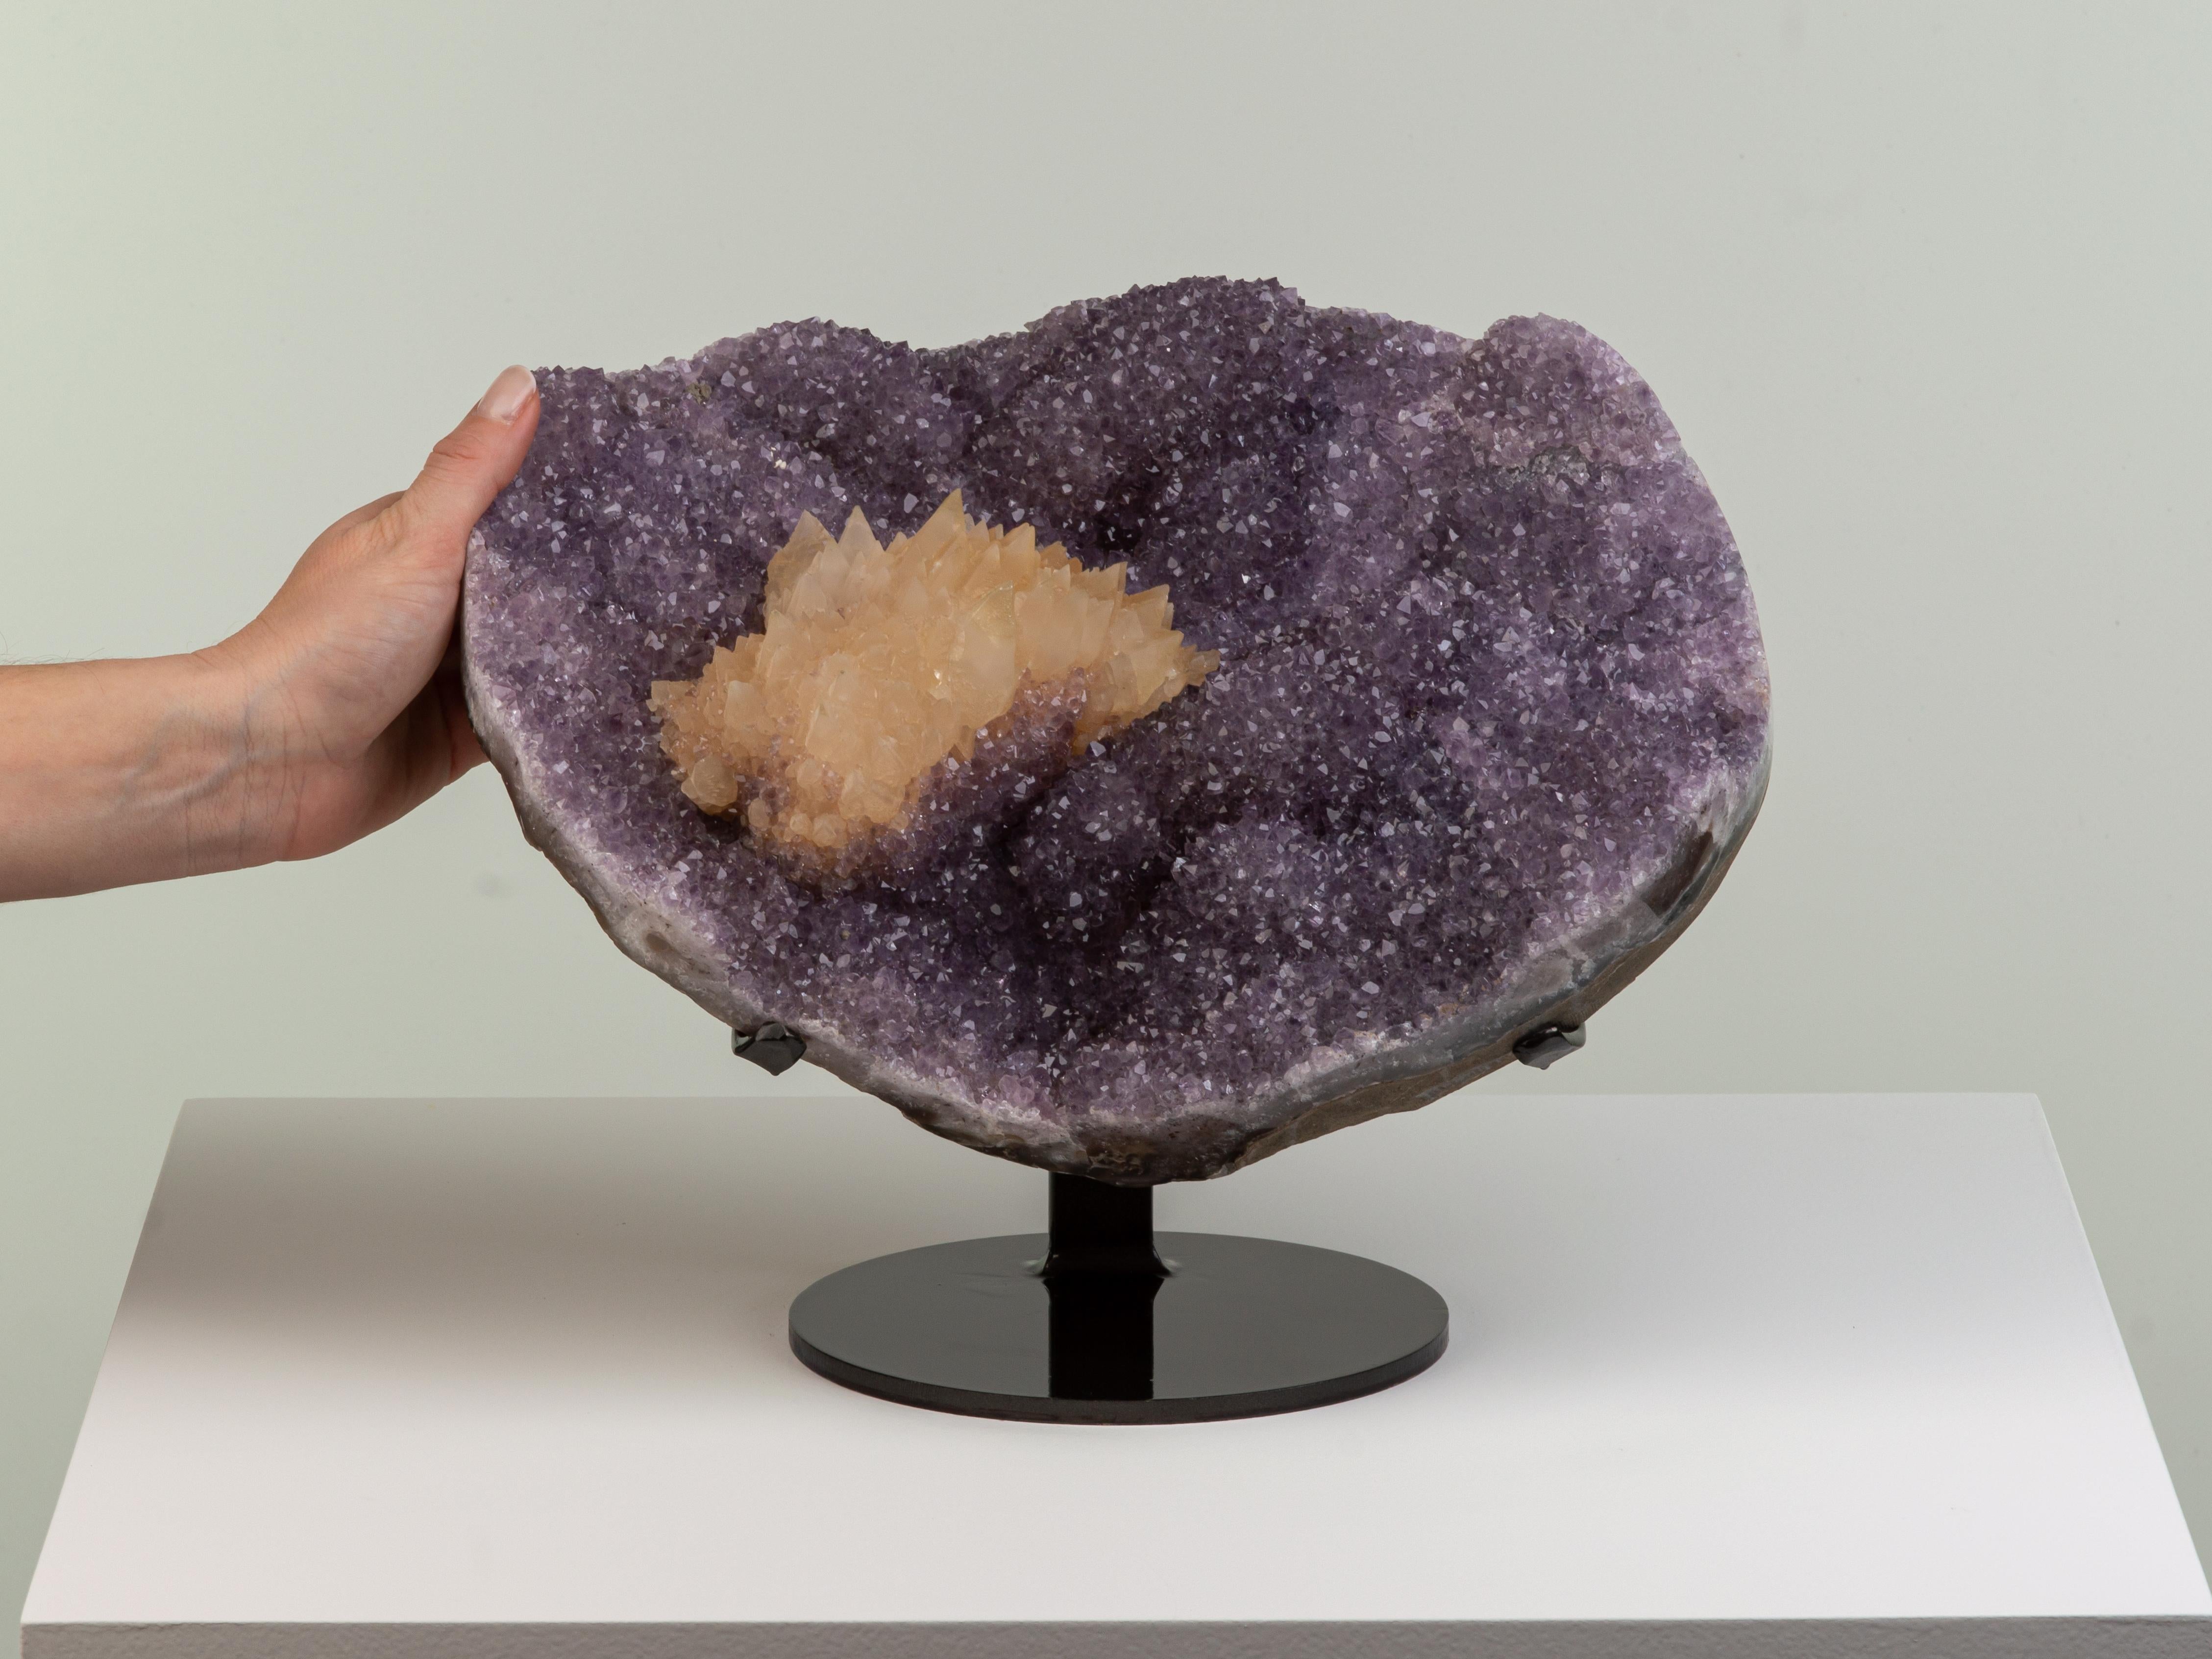 A large bowl shaped piece formed of small lilac amethyst crystals with a
stunning central honey coloured calcite formation resembling a rosette.
At the base of the calcite pink druzy quartz can be seen.

This piece was legally and ethically